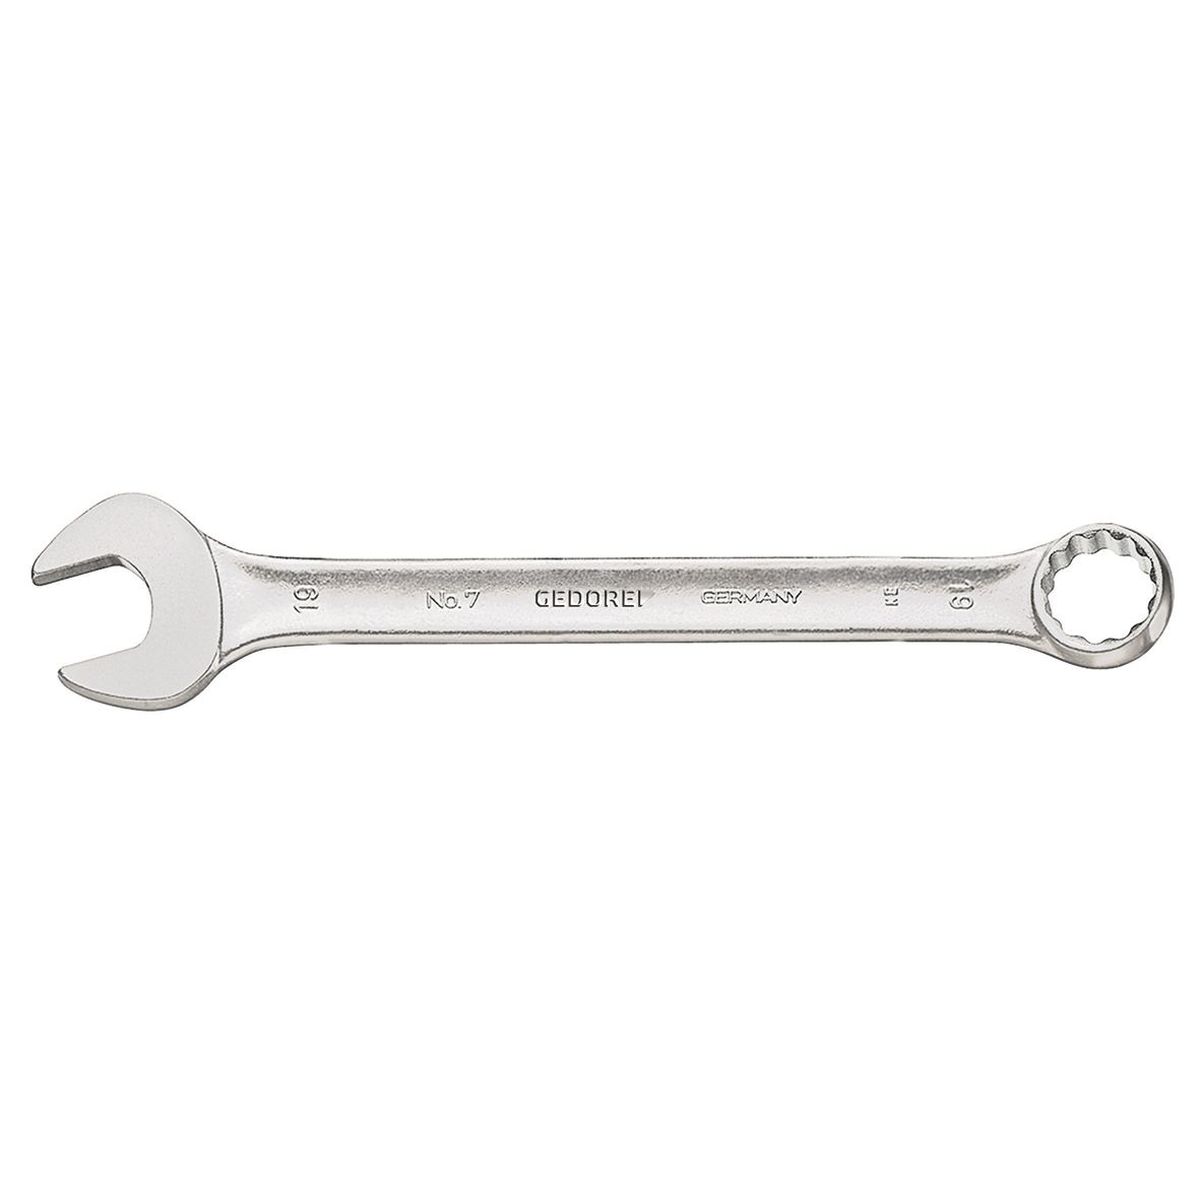 Combination spanner 14mm No.7 14 Gedore